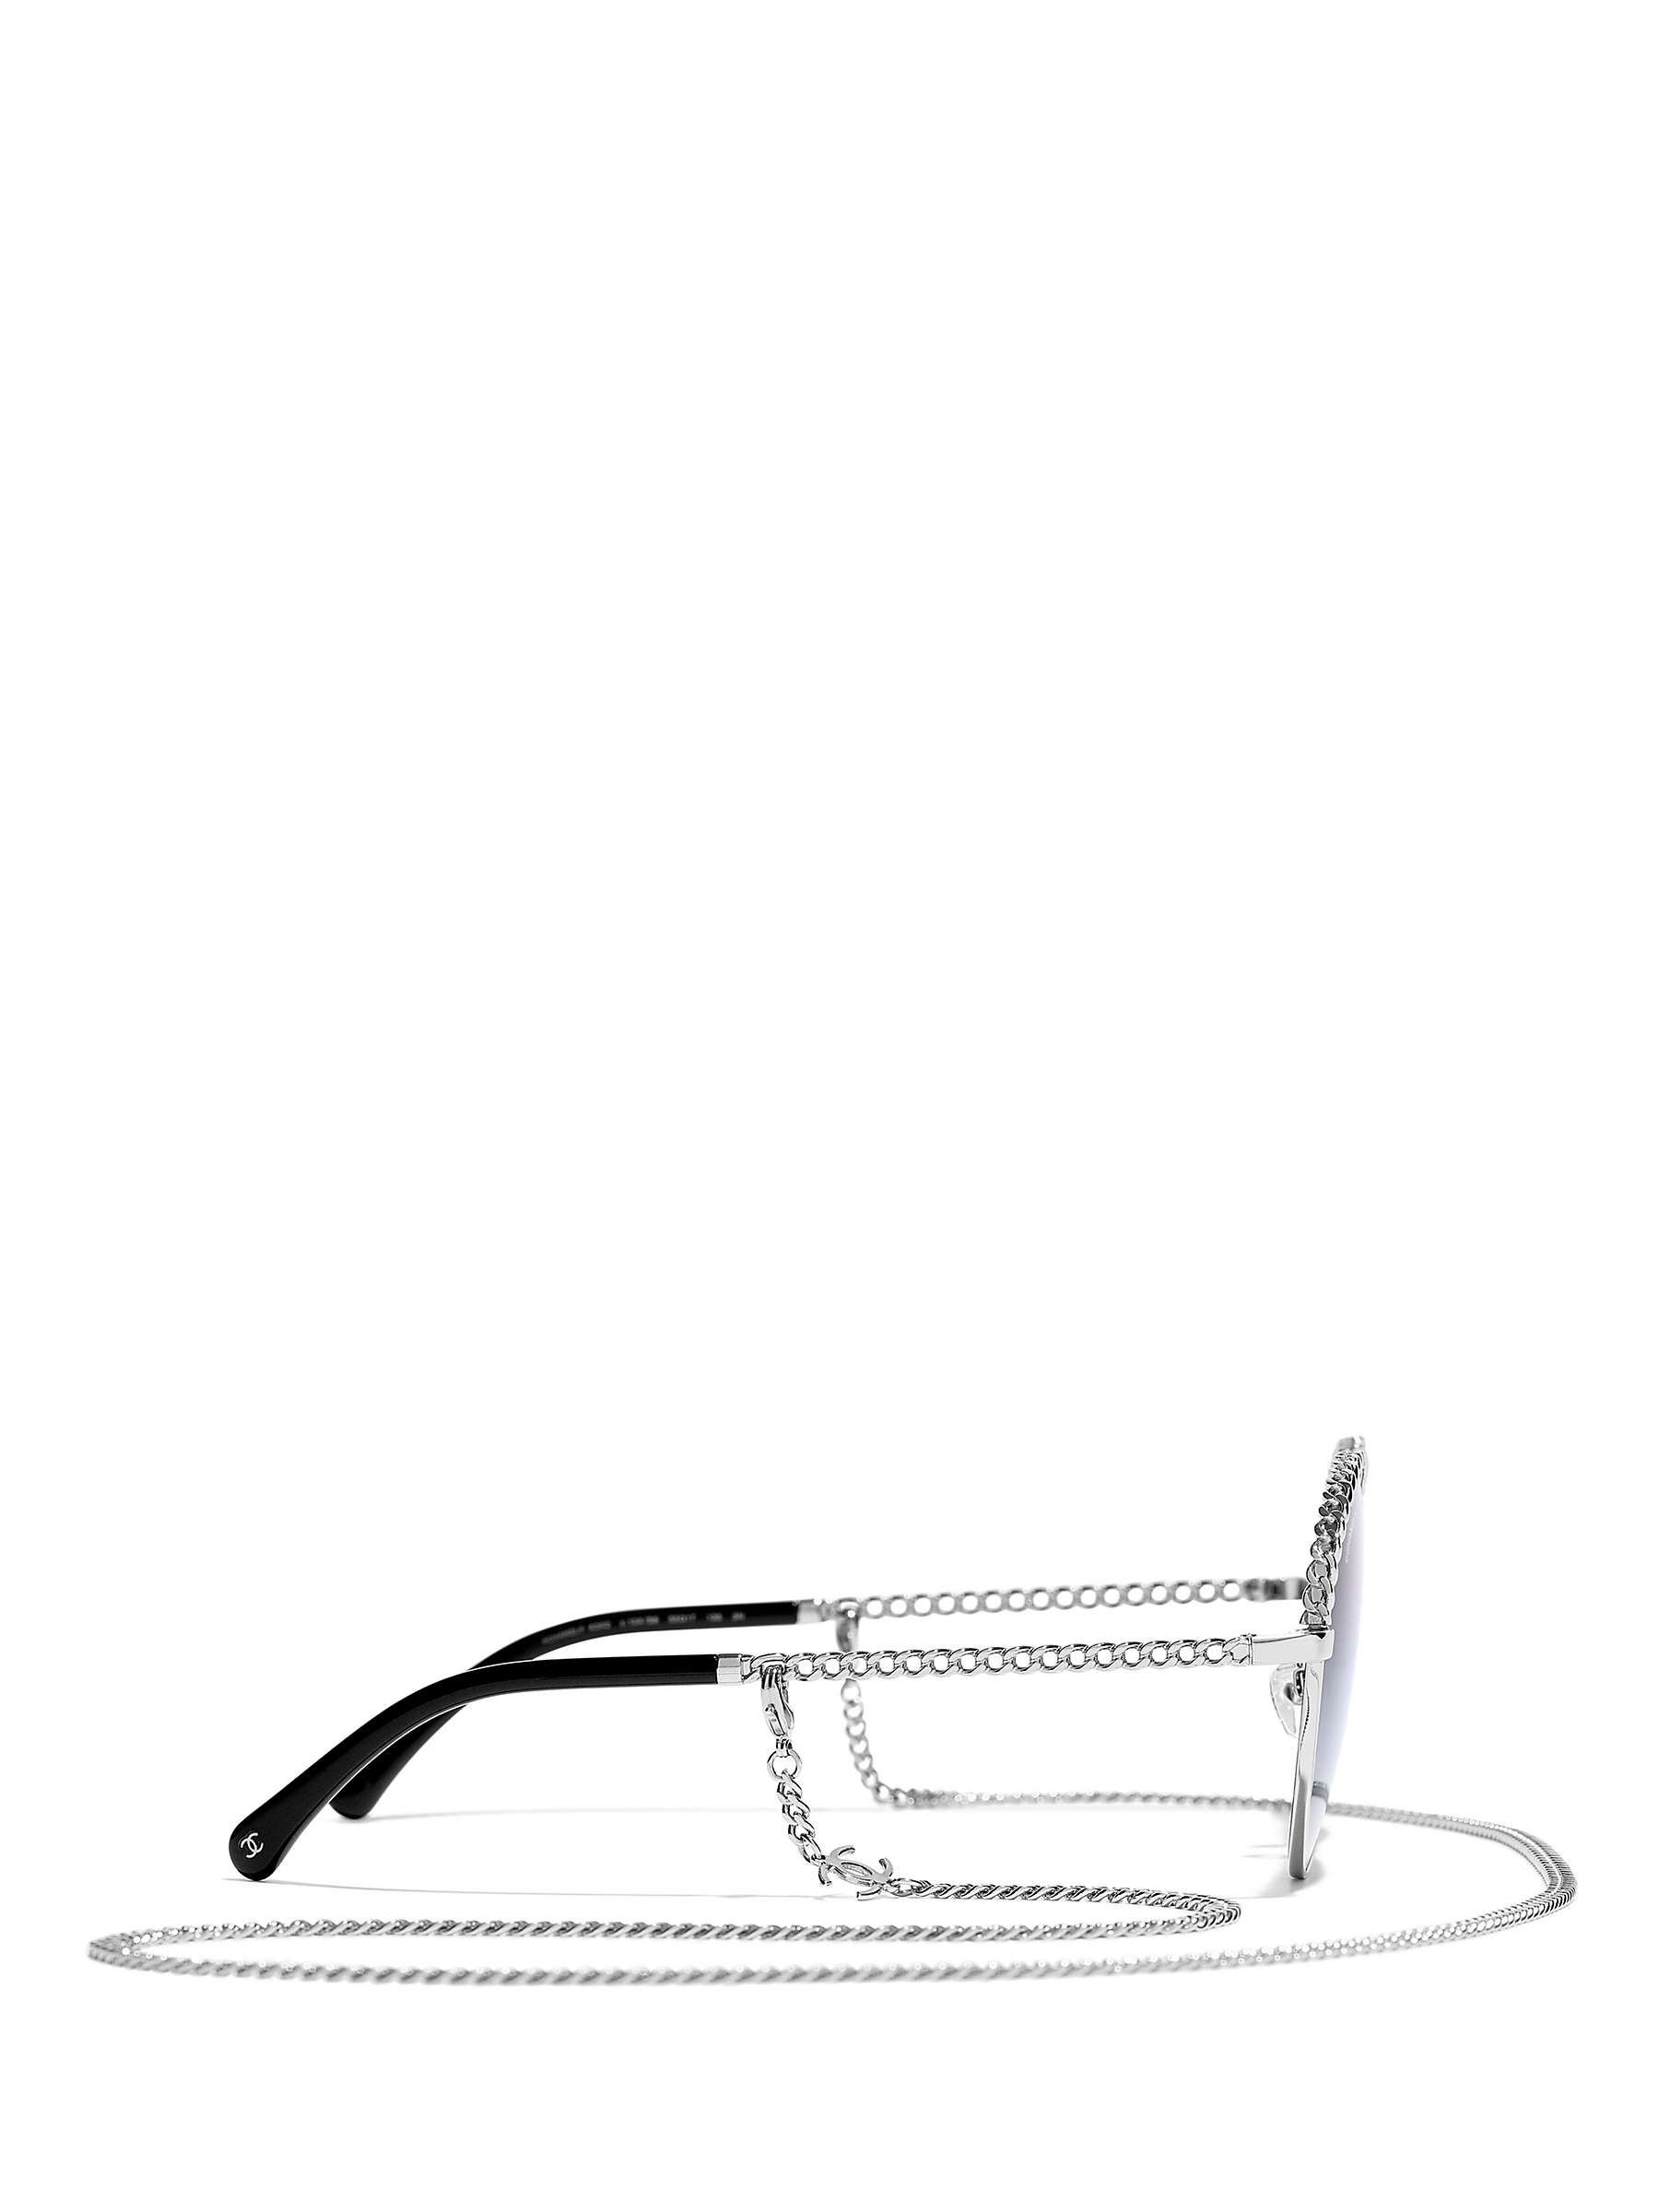 Buy CHANEL Oval Sunglasses CH4242 Silver/Grey Gradient Online at johnlewis.com